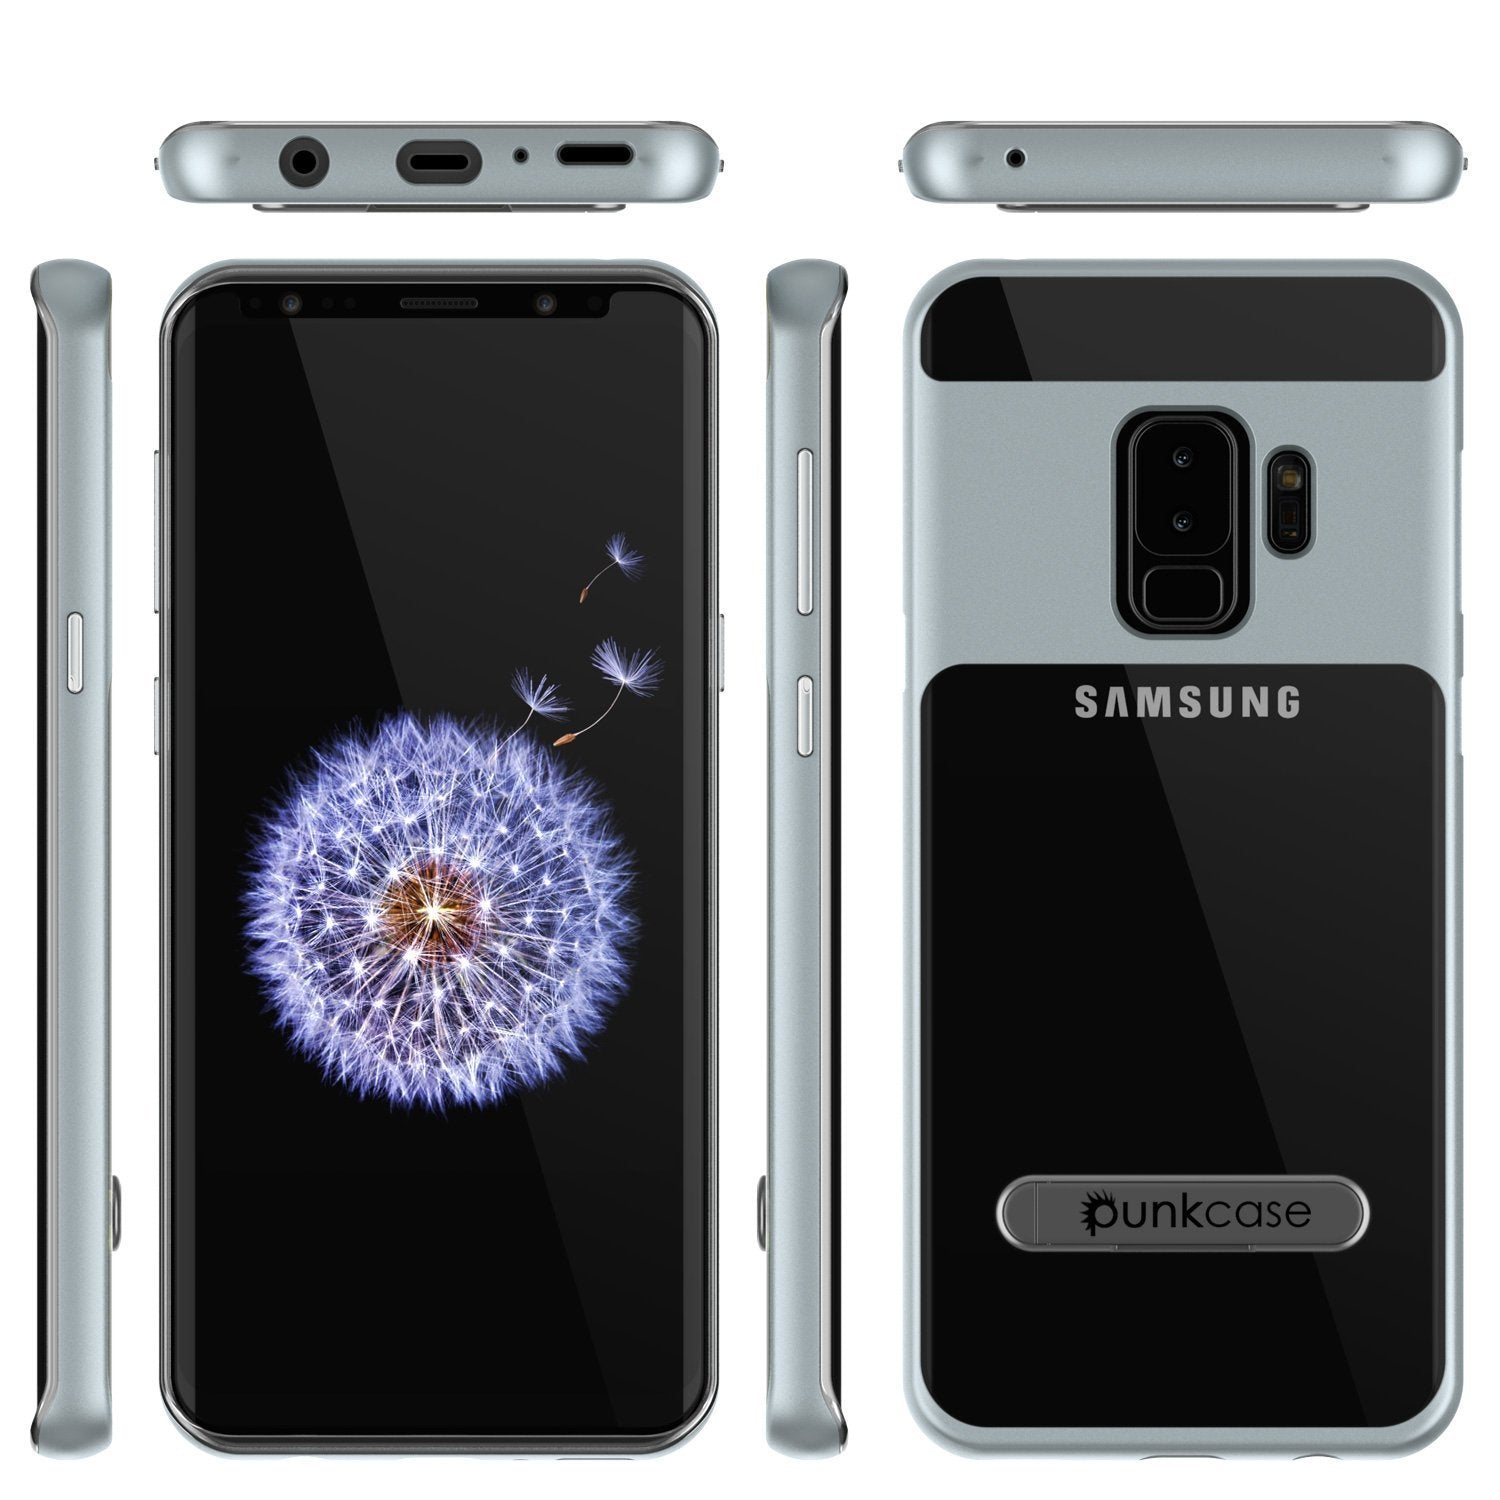 Galaxy S9+ Plus Case, PUNKcase [LUCID 3.0 Series] [Slim Fit] [Clear Back] Armor Cover w/ Integrated Kickstand, Anti-Shock System & PUNKSHIELD Screen Protector for Samsung Galaxy S9+ Plus [Silver] - PunkCase NZ